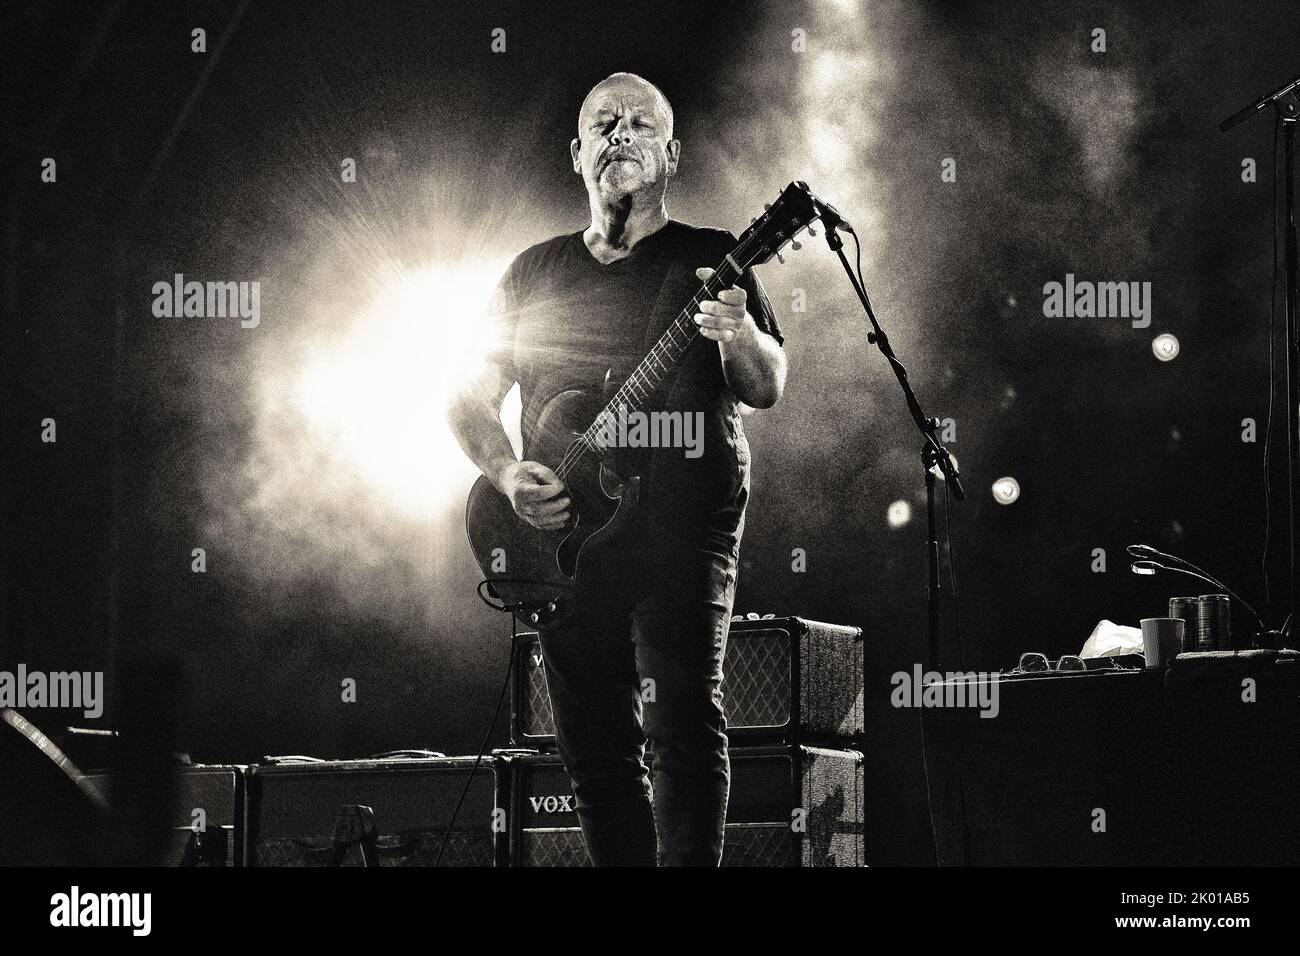 Black Francis of Pixies live on stage 2022 Stock Photo